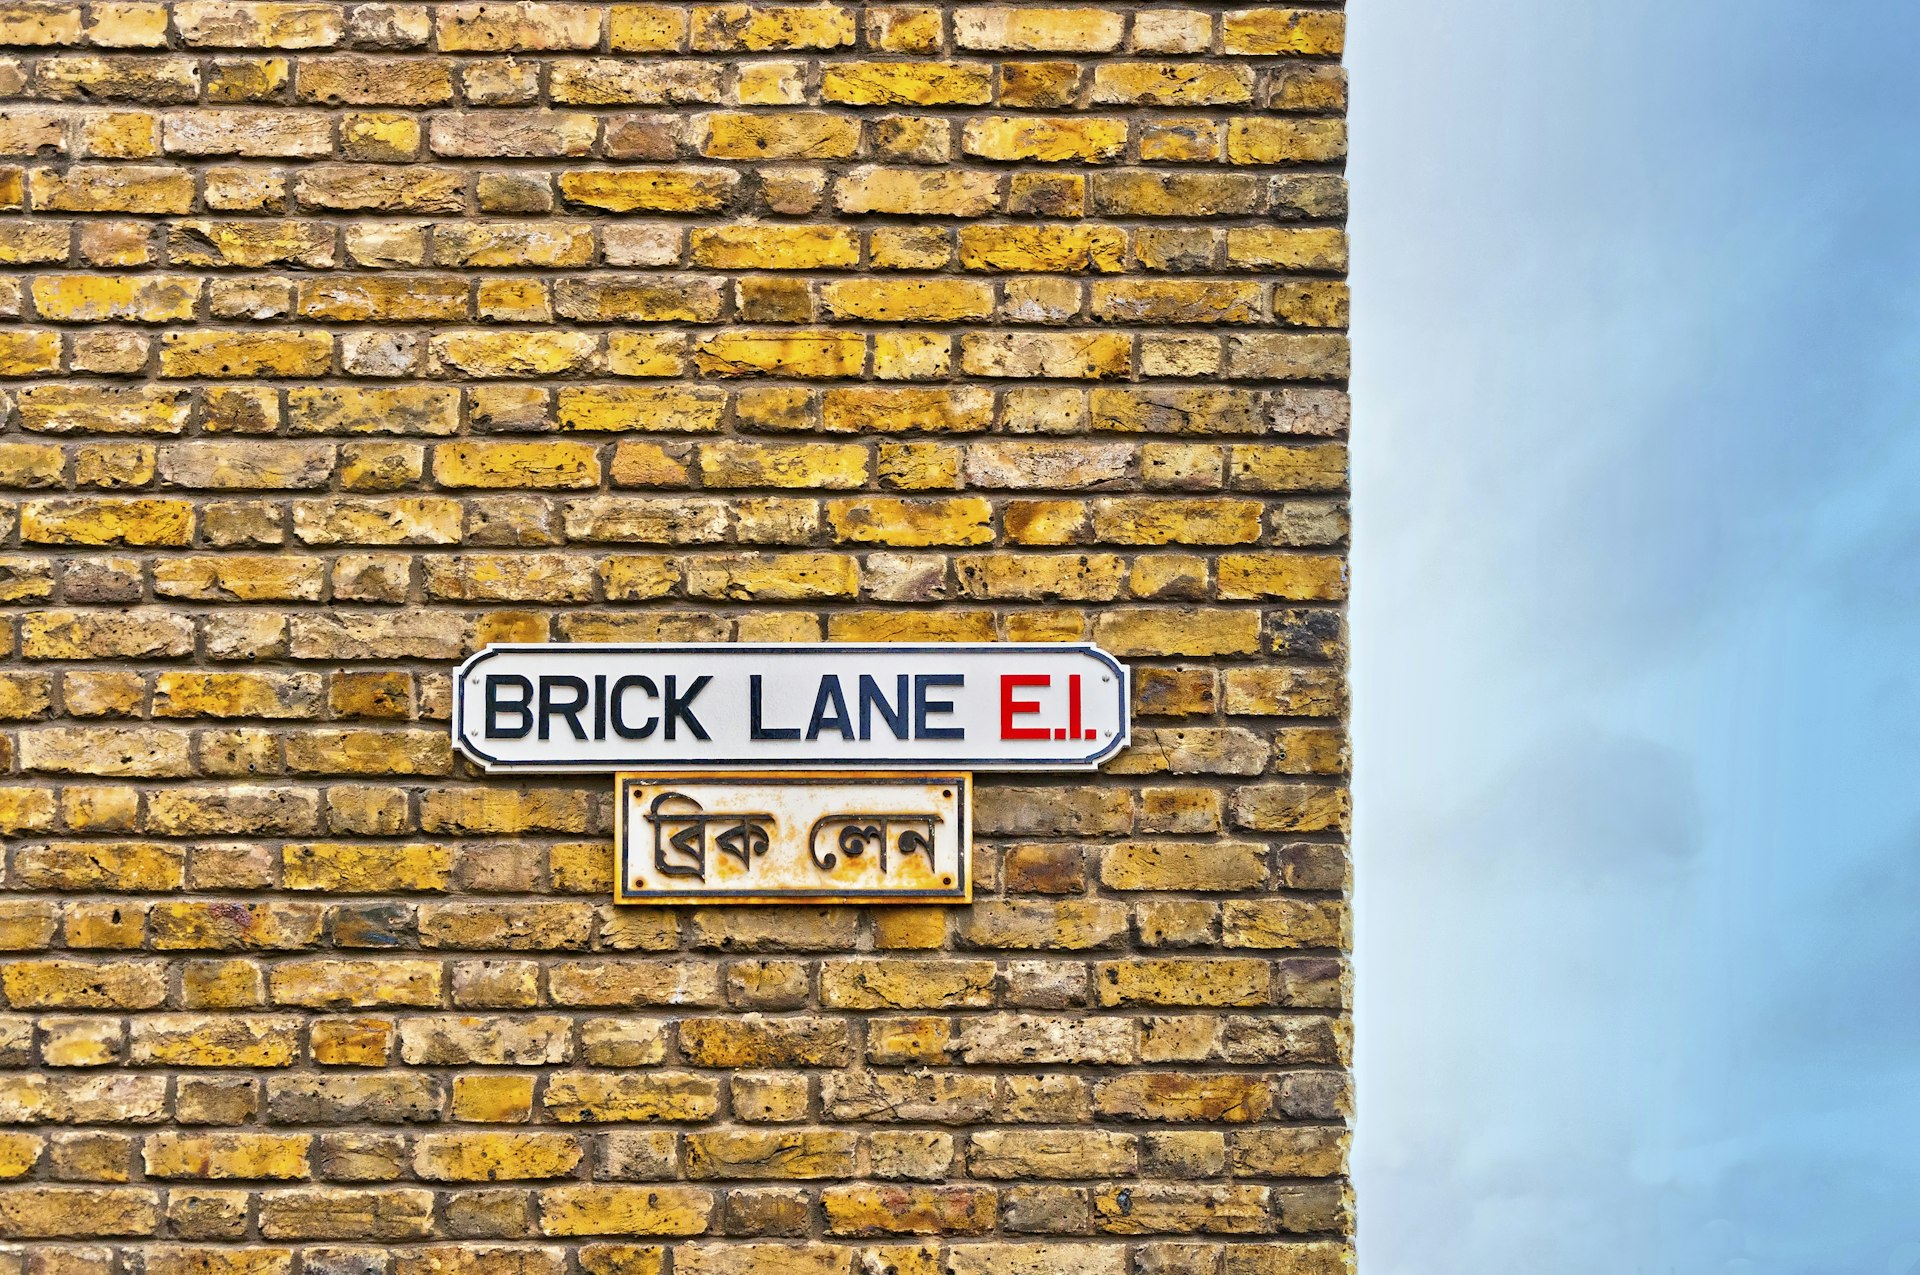 Brick Lane street sign on wall, London Brick Travel Destinations Horizontal Outdoors Multi-Ethnic Group Brick Wall Surrounding UK England Street Old Famous Place International Landmark British Culture Tower Hamlets Wall - Building Feature Brick Lane - Inner London London - England Photography Capital Cities Shoreditch East London Fashionable ©eddygaleotti/Getty Images